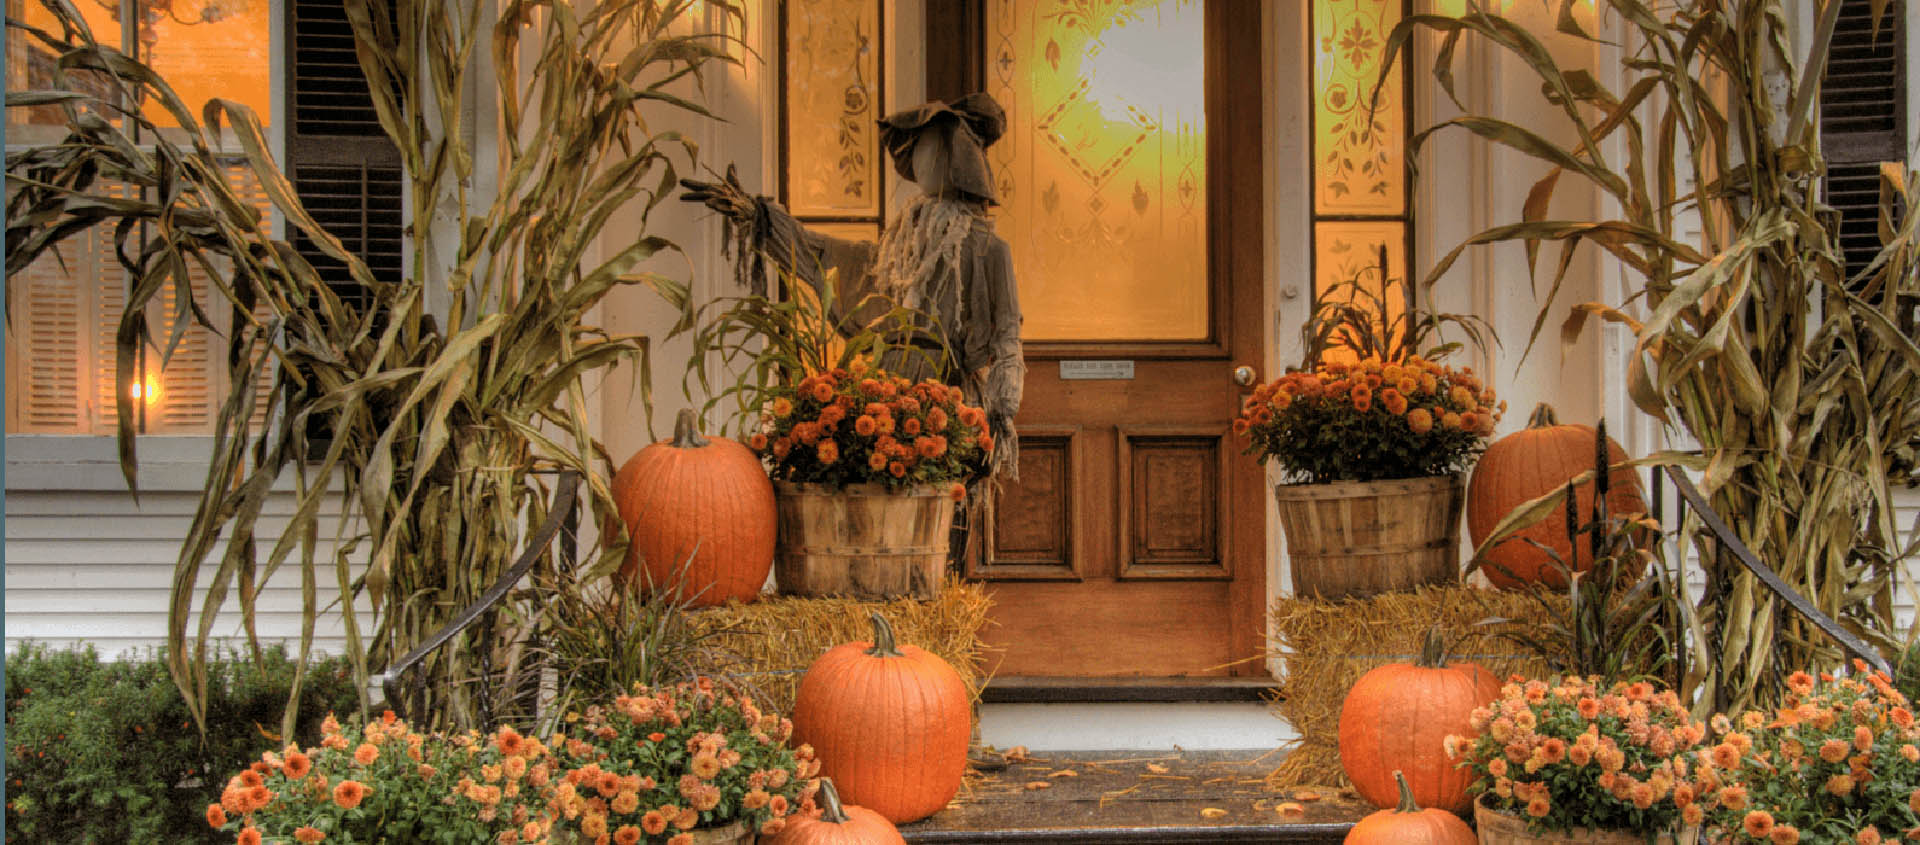 Ideas for Beautiful Fall Decor from Broadview Featured Image